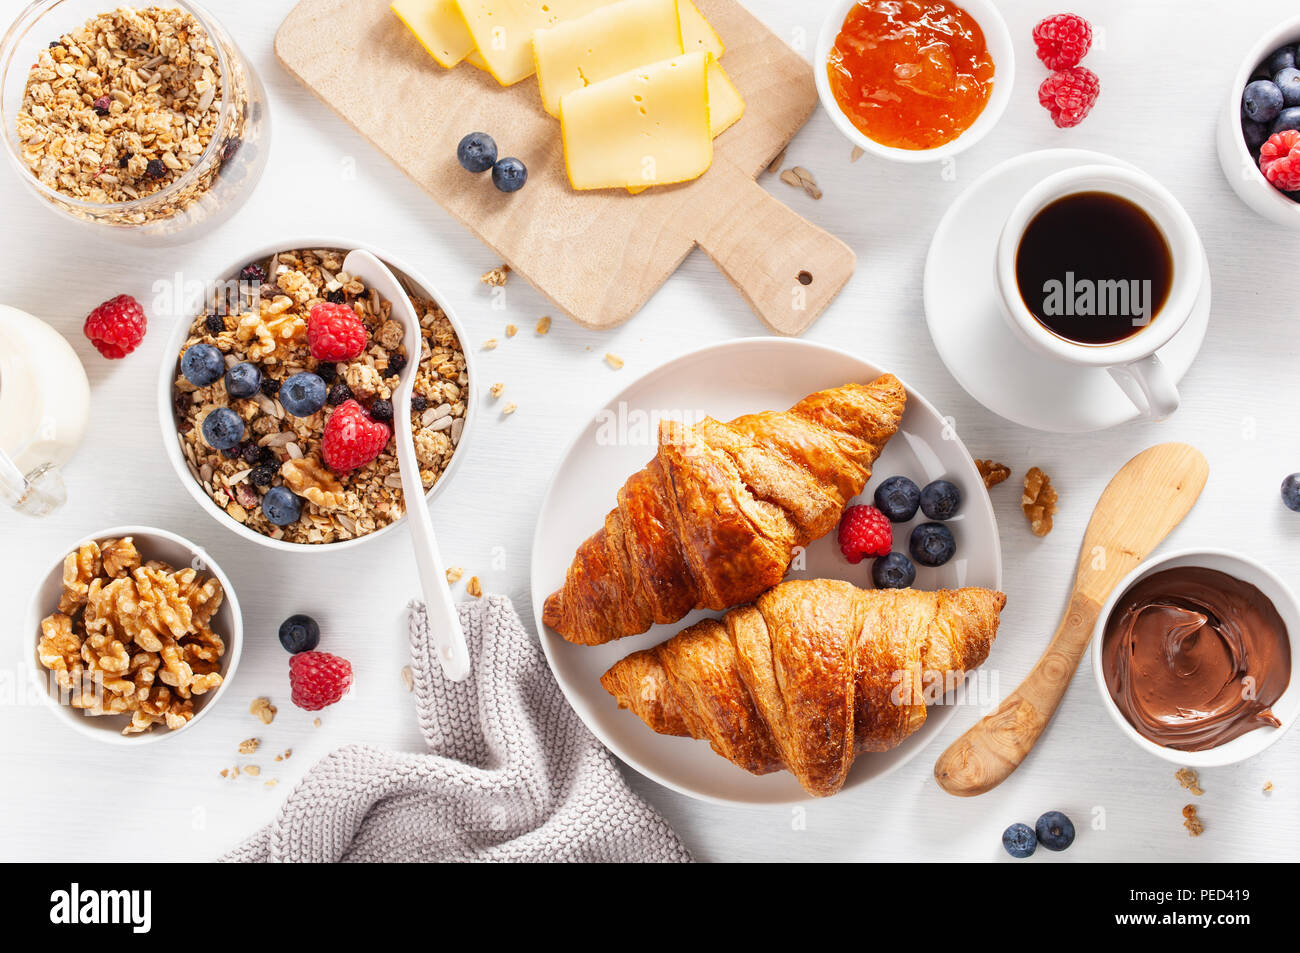 healthy breakfast with granola, berry, nuts, croissant, jam, chocolate spread and coffee. Top view Stock Photo